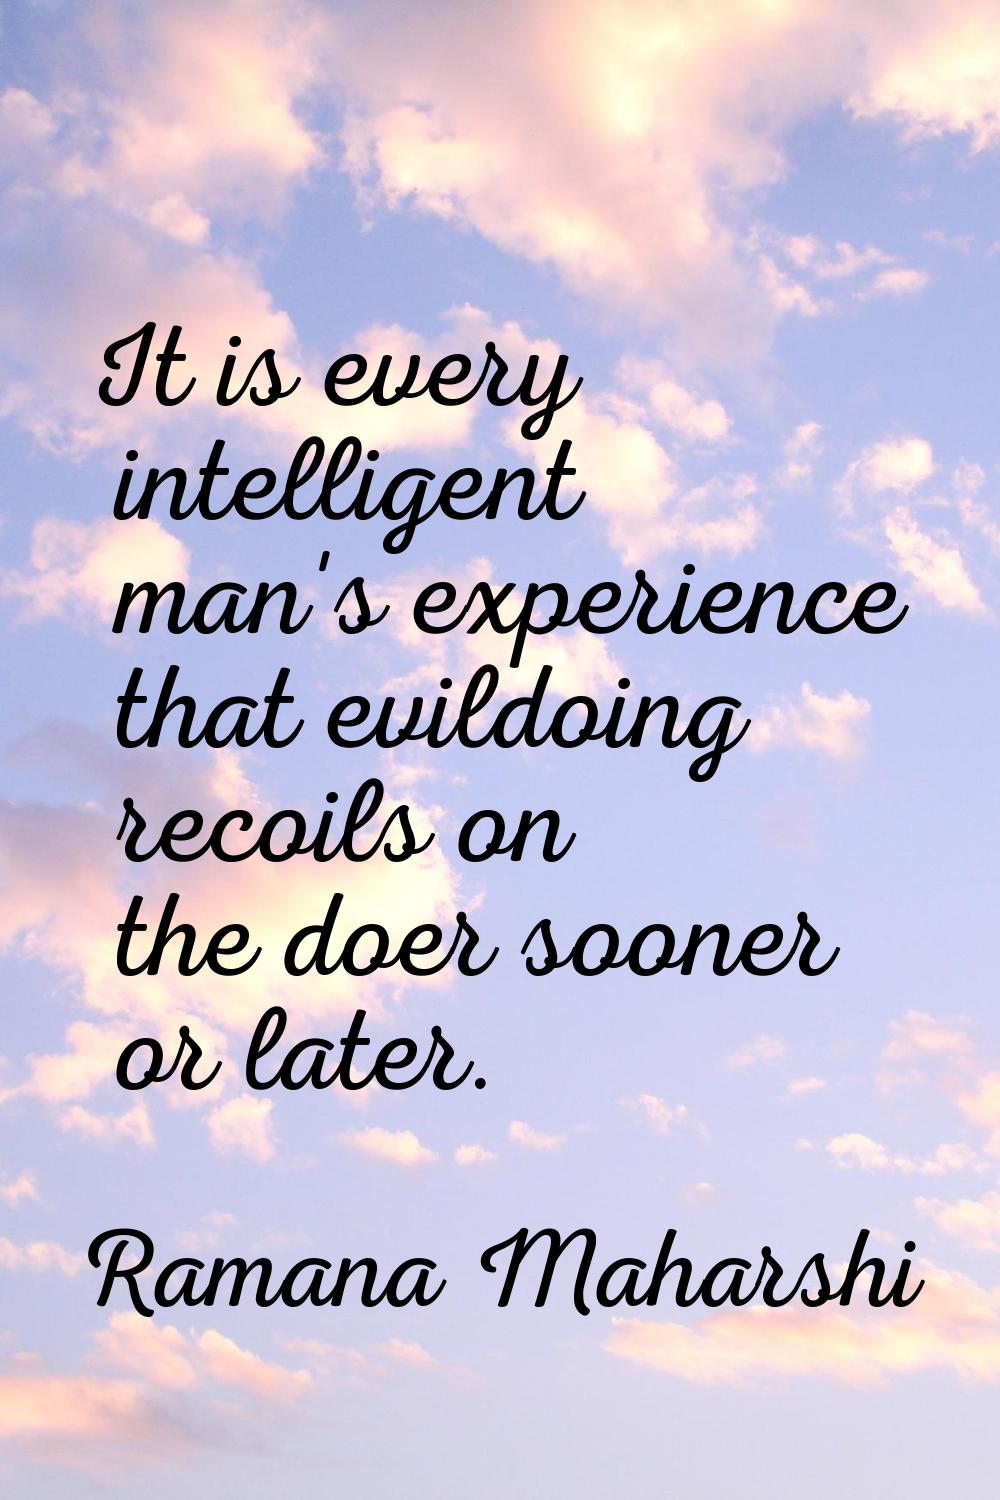 It is every intelligent man's experience that evildoing recoils on the doer sooner or later.